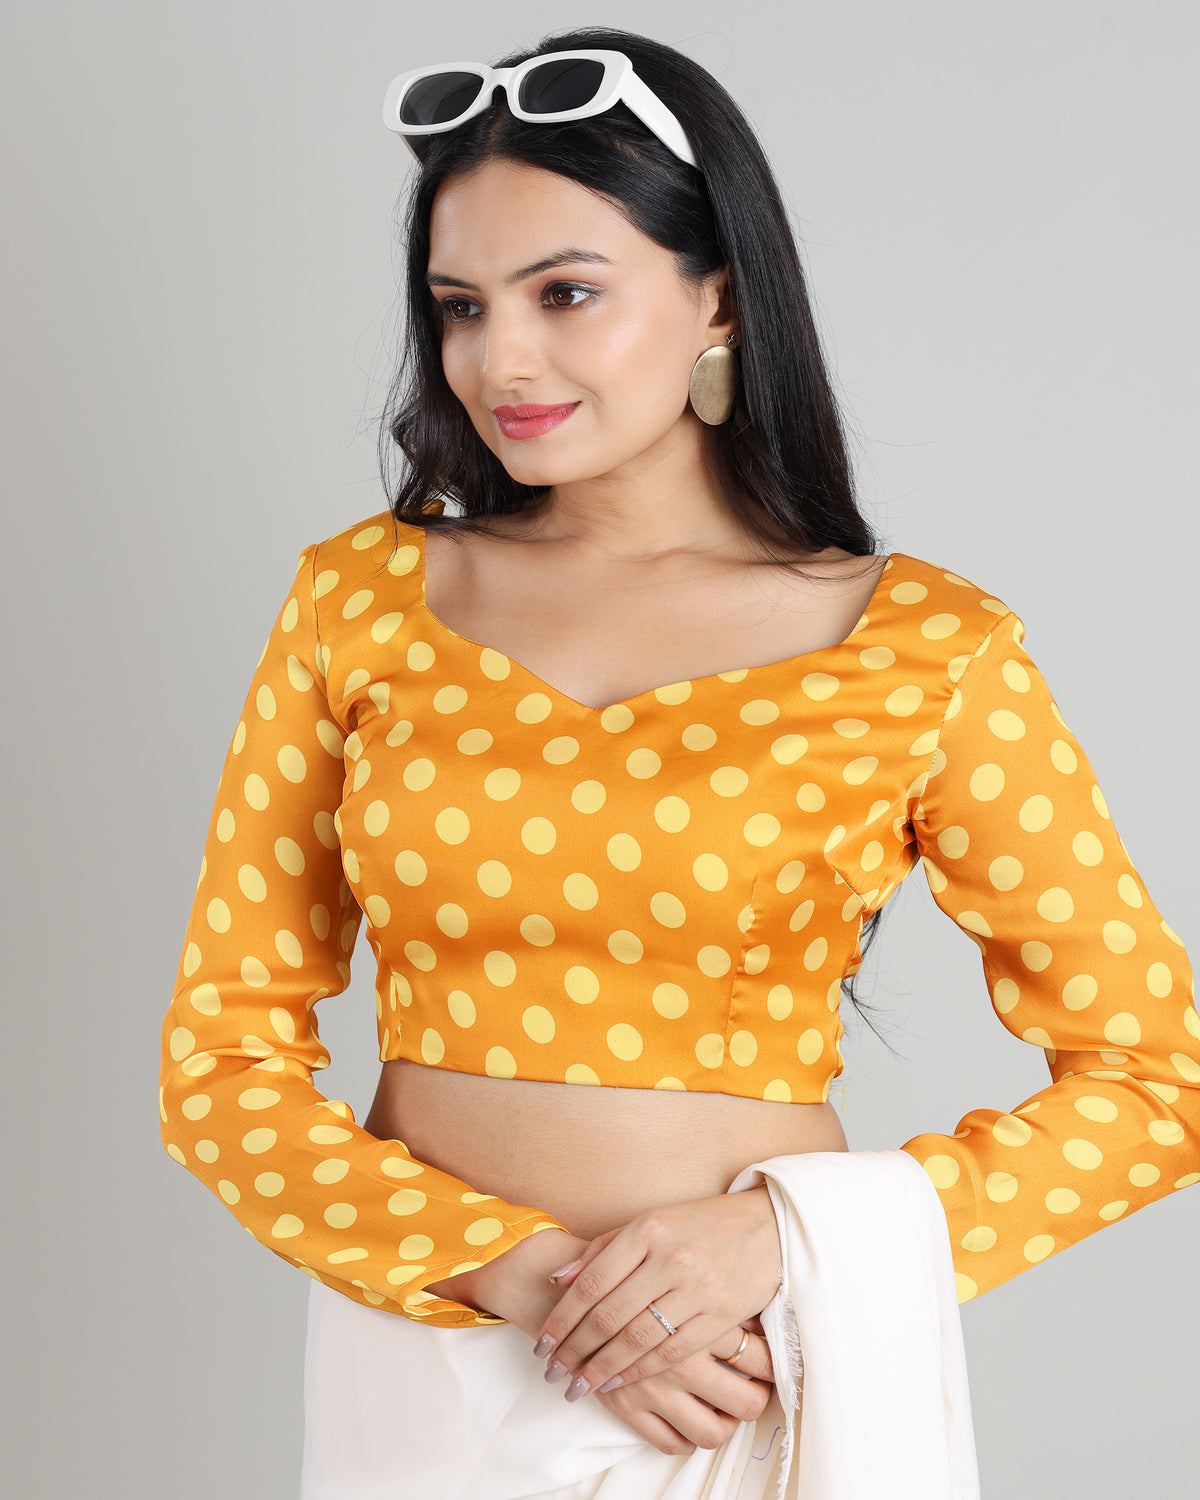 Polka Party : All-Day Comfort in Silky Blouse